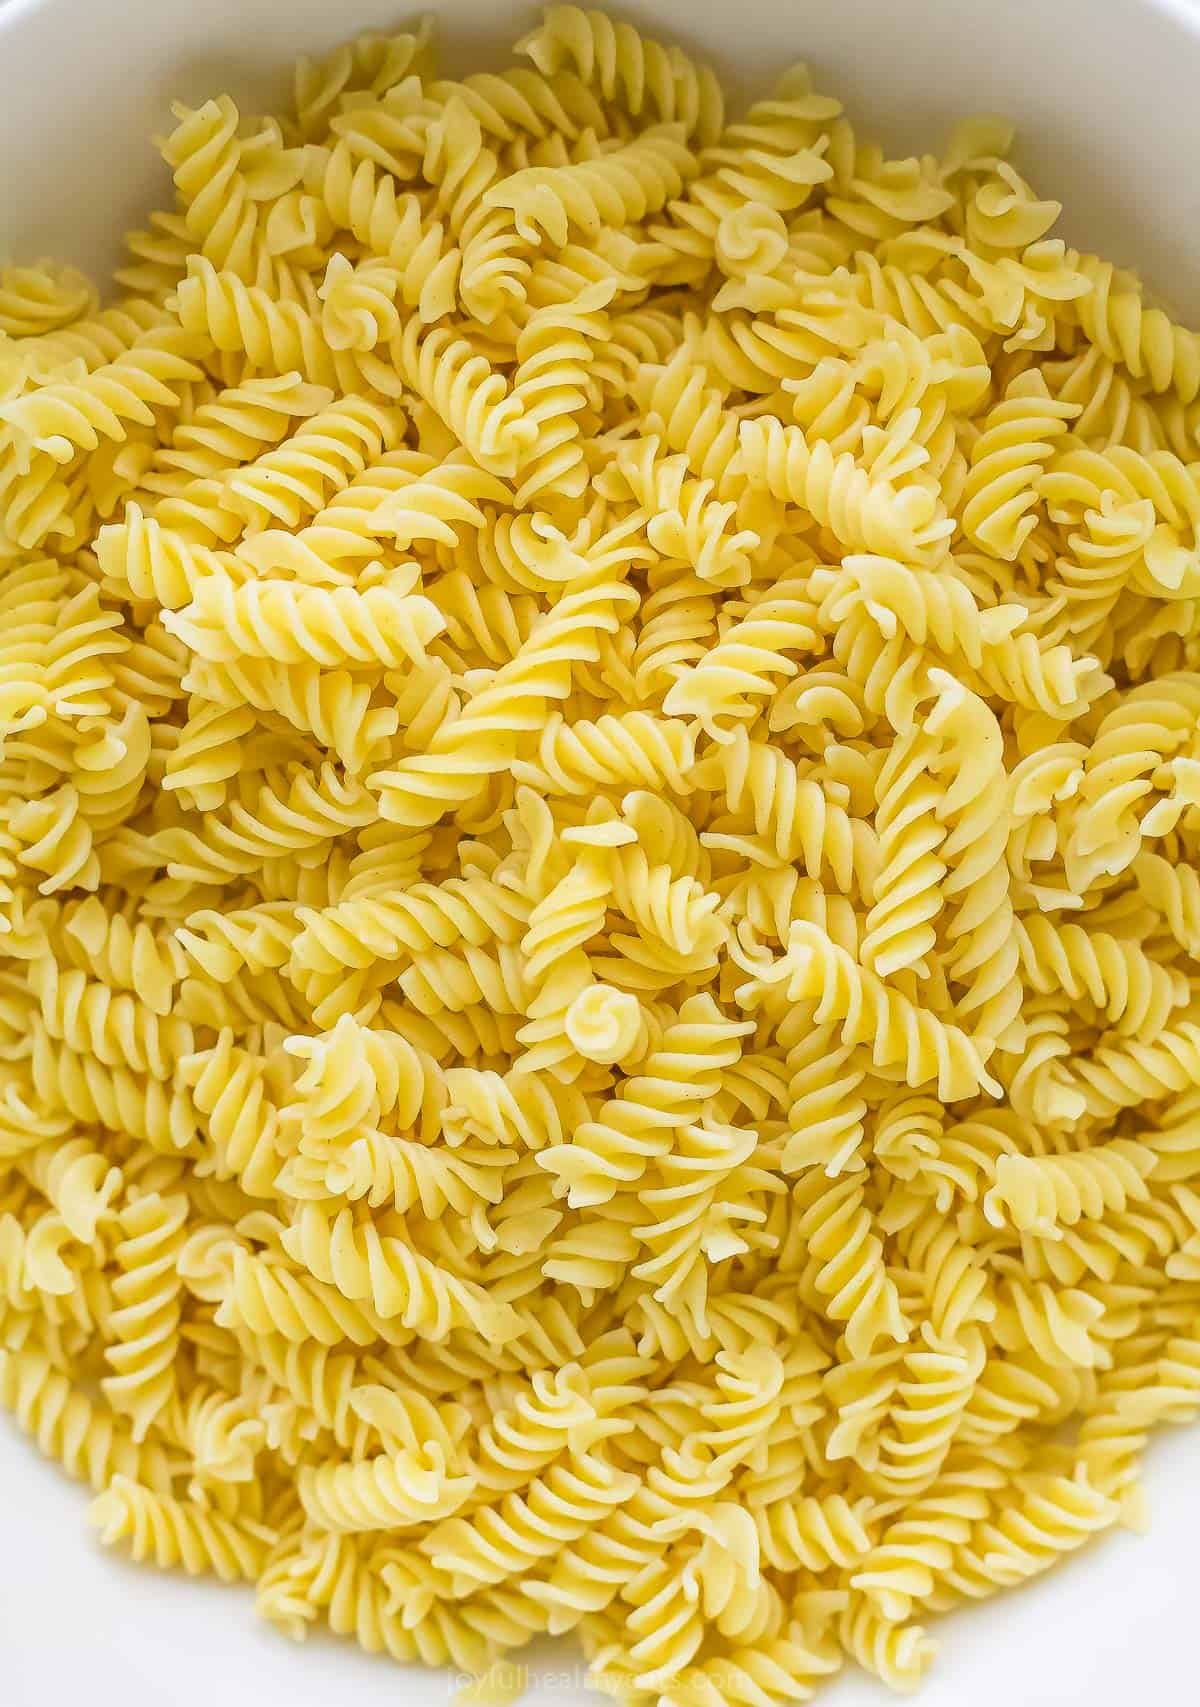 A large bowl filled with rotini pasta cooked to al dente